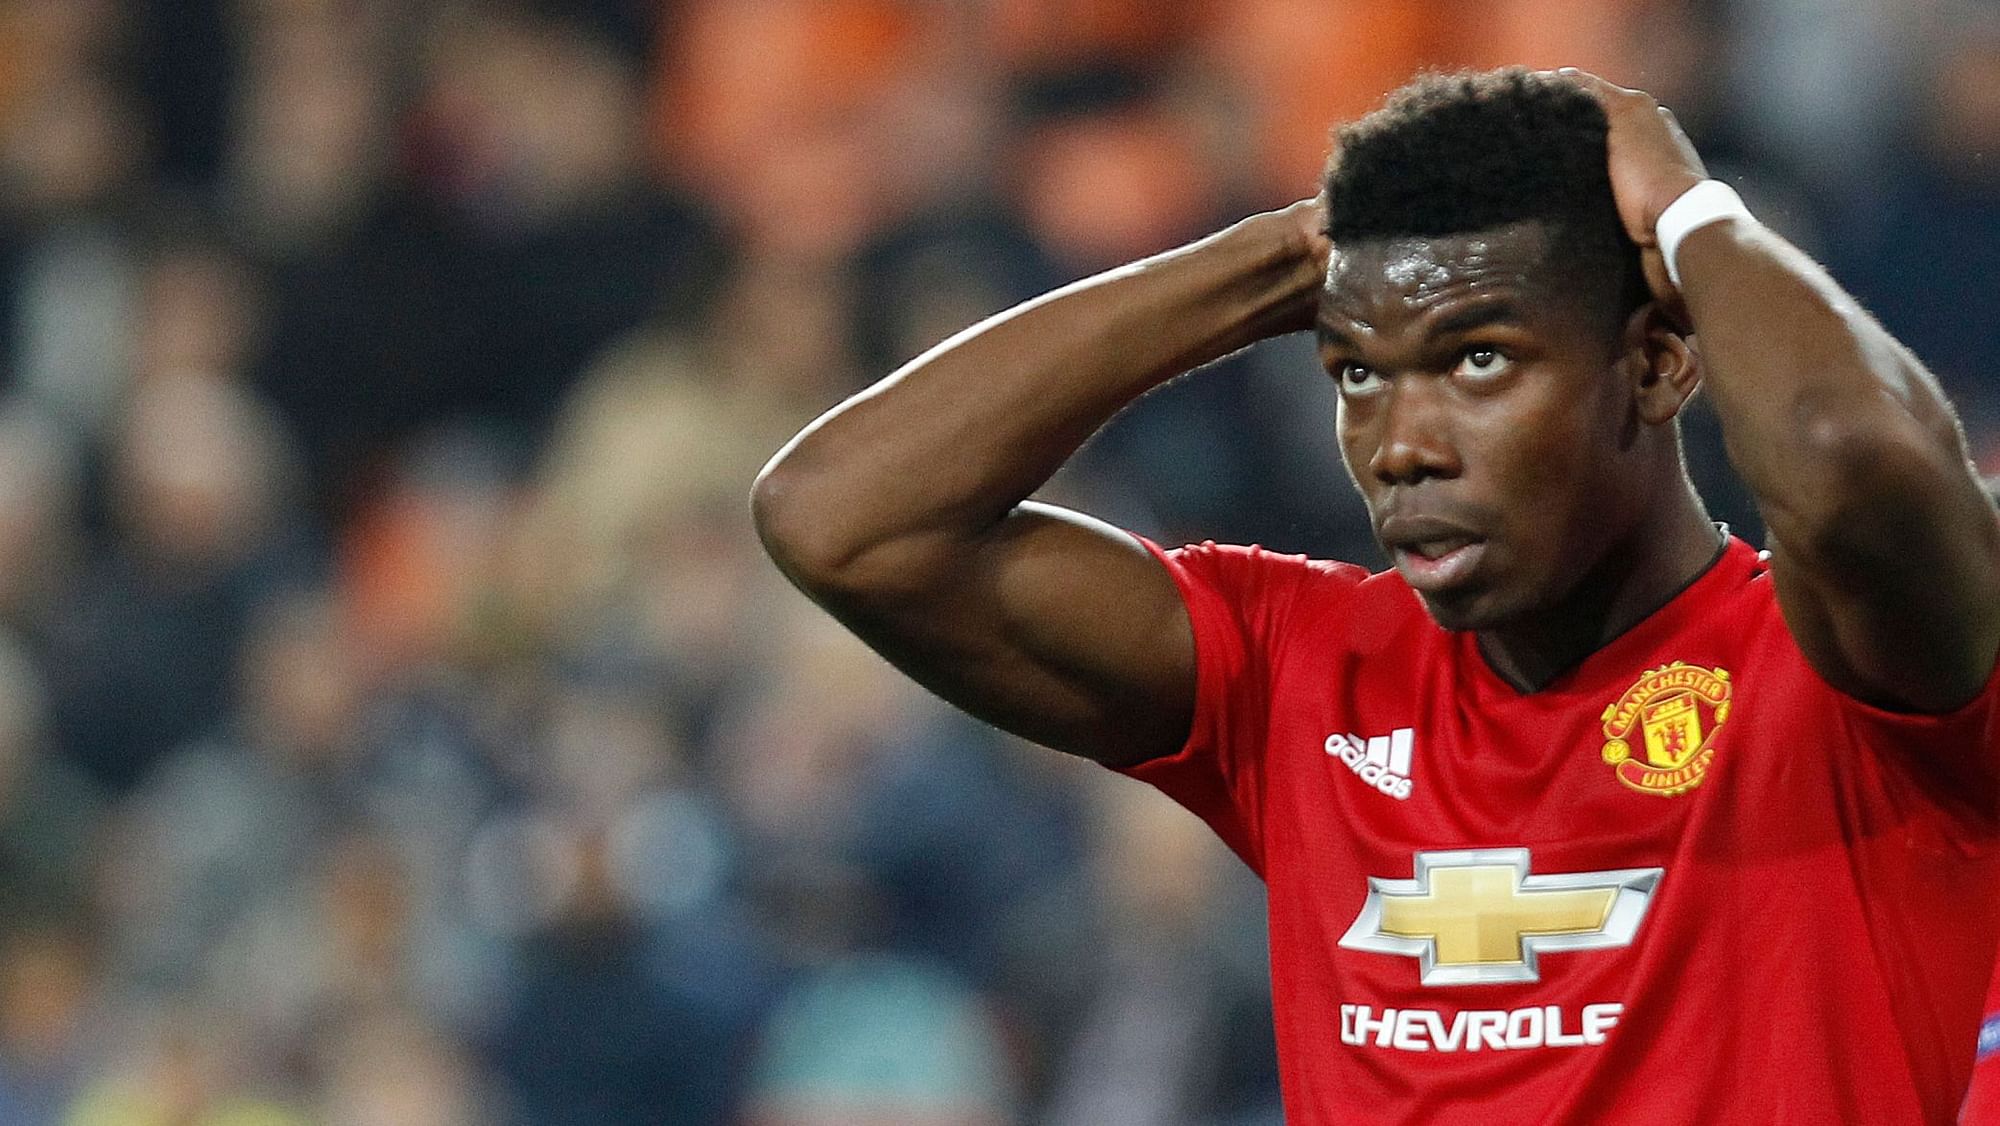 Manchester United’s Paul Pogba reacts after missing a chance to score during a Group H Champions League soccer match.